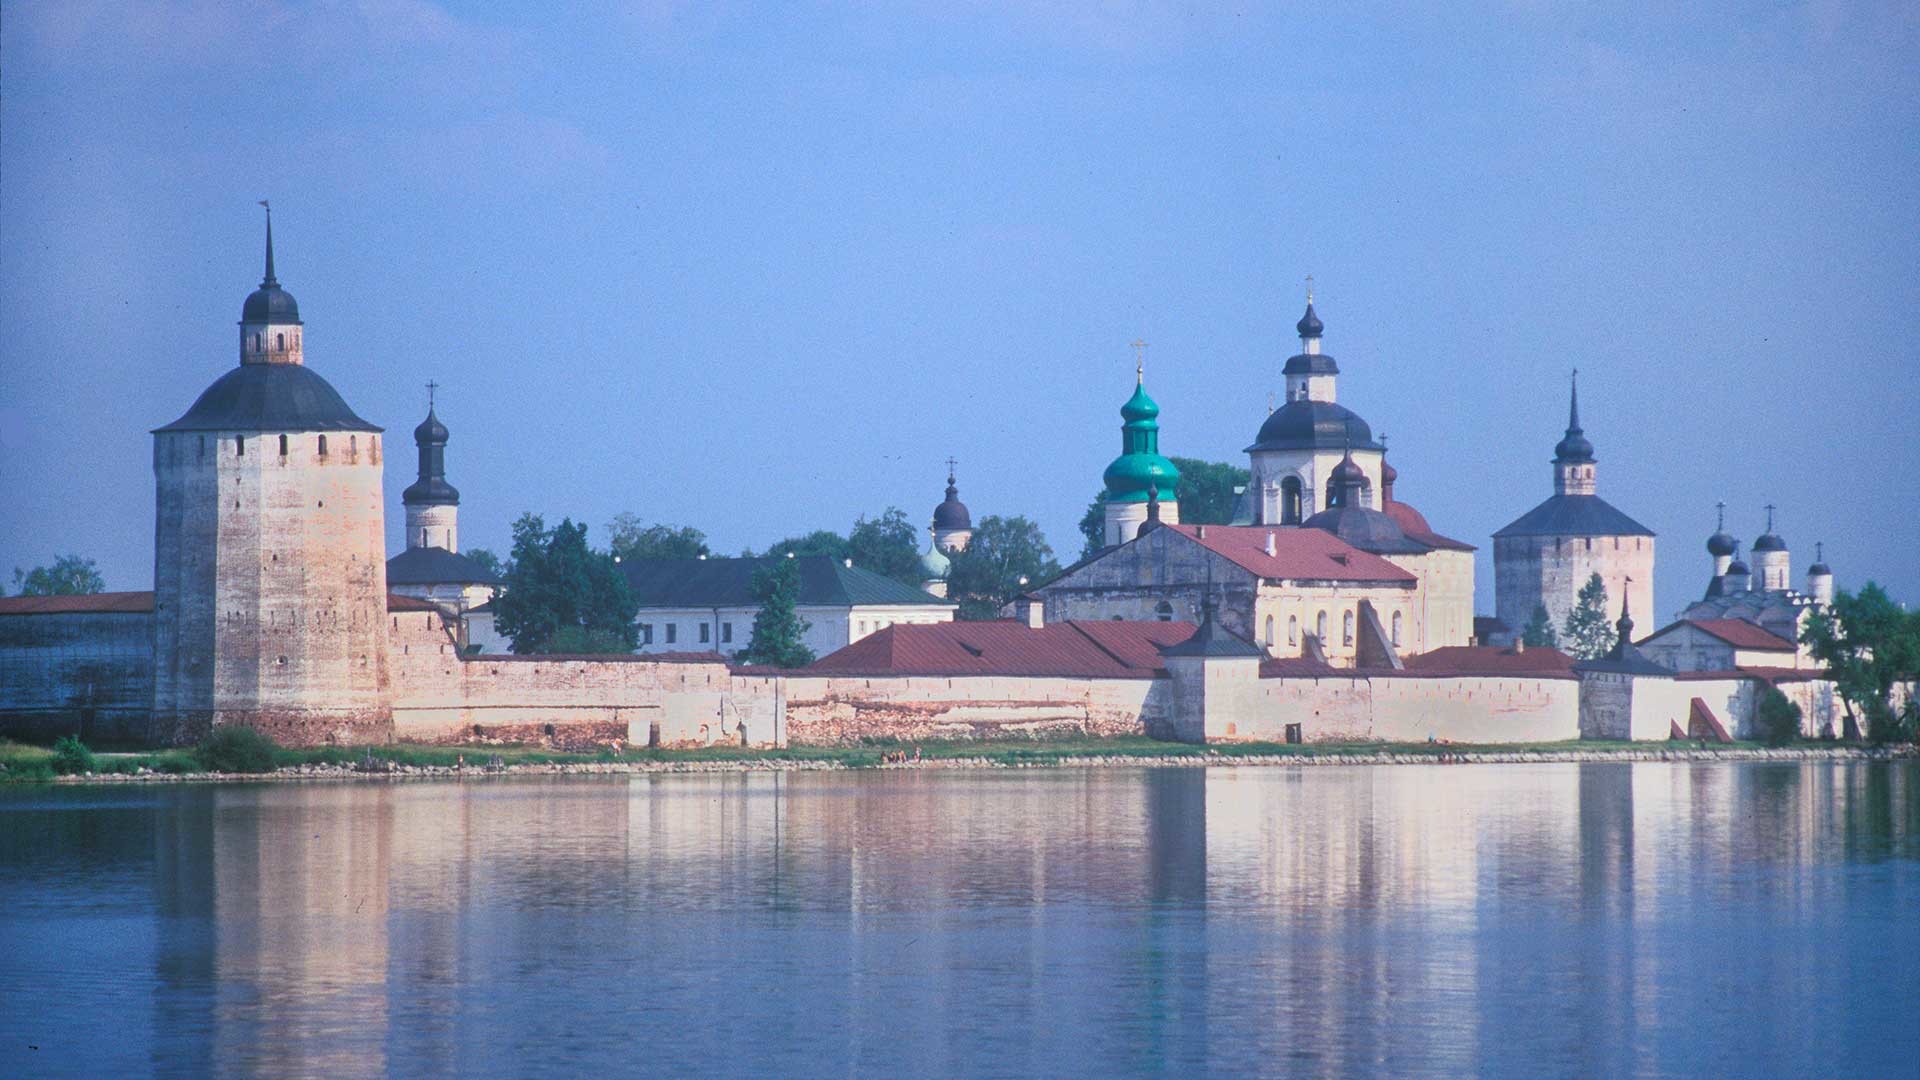 From left: Belozersk Tower, Gate Church of St. John Climacus, Cathedral of Decapitation of John the Baptist (behind trees), Dormition Cathedral, Refectory Church of Presentation, Church of Archangel Gabriel, bell tower, Smithy Tower, Church of Transfiguration. July 15, 1999.